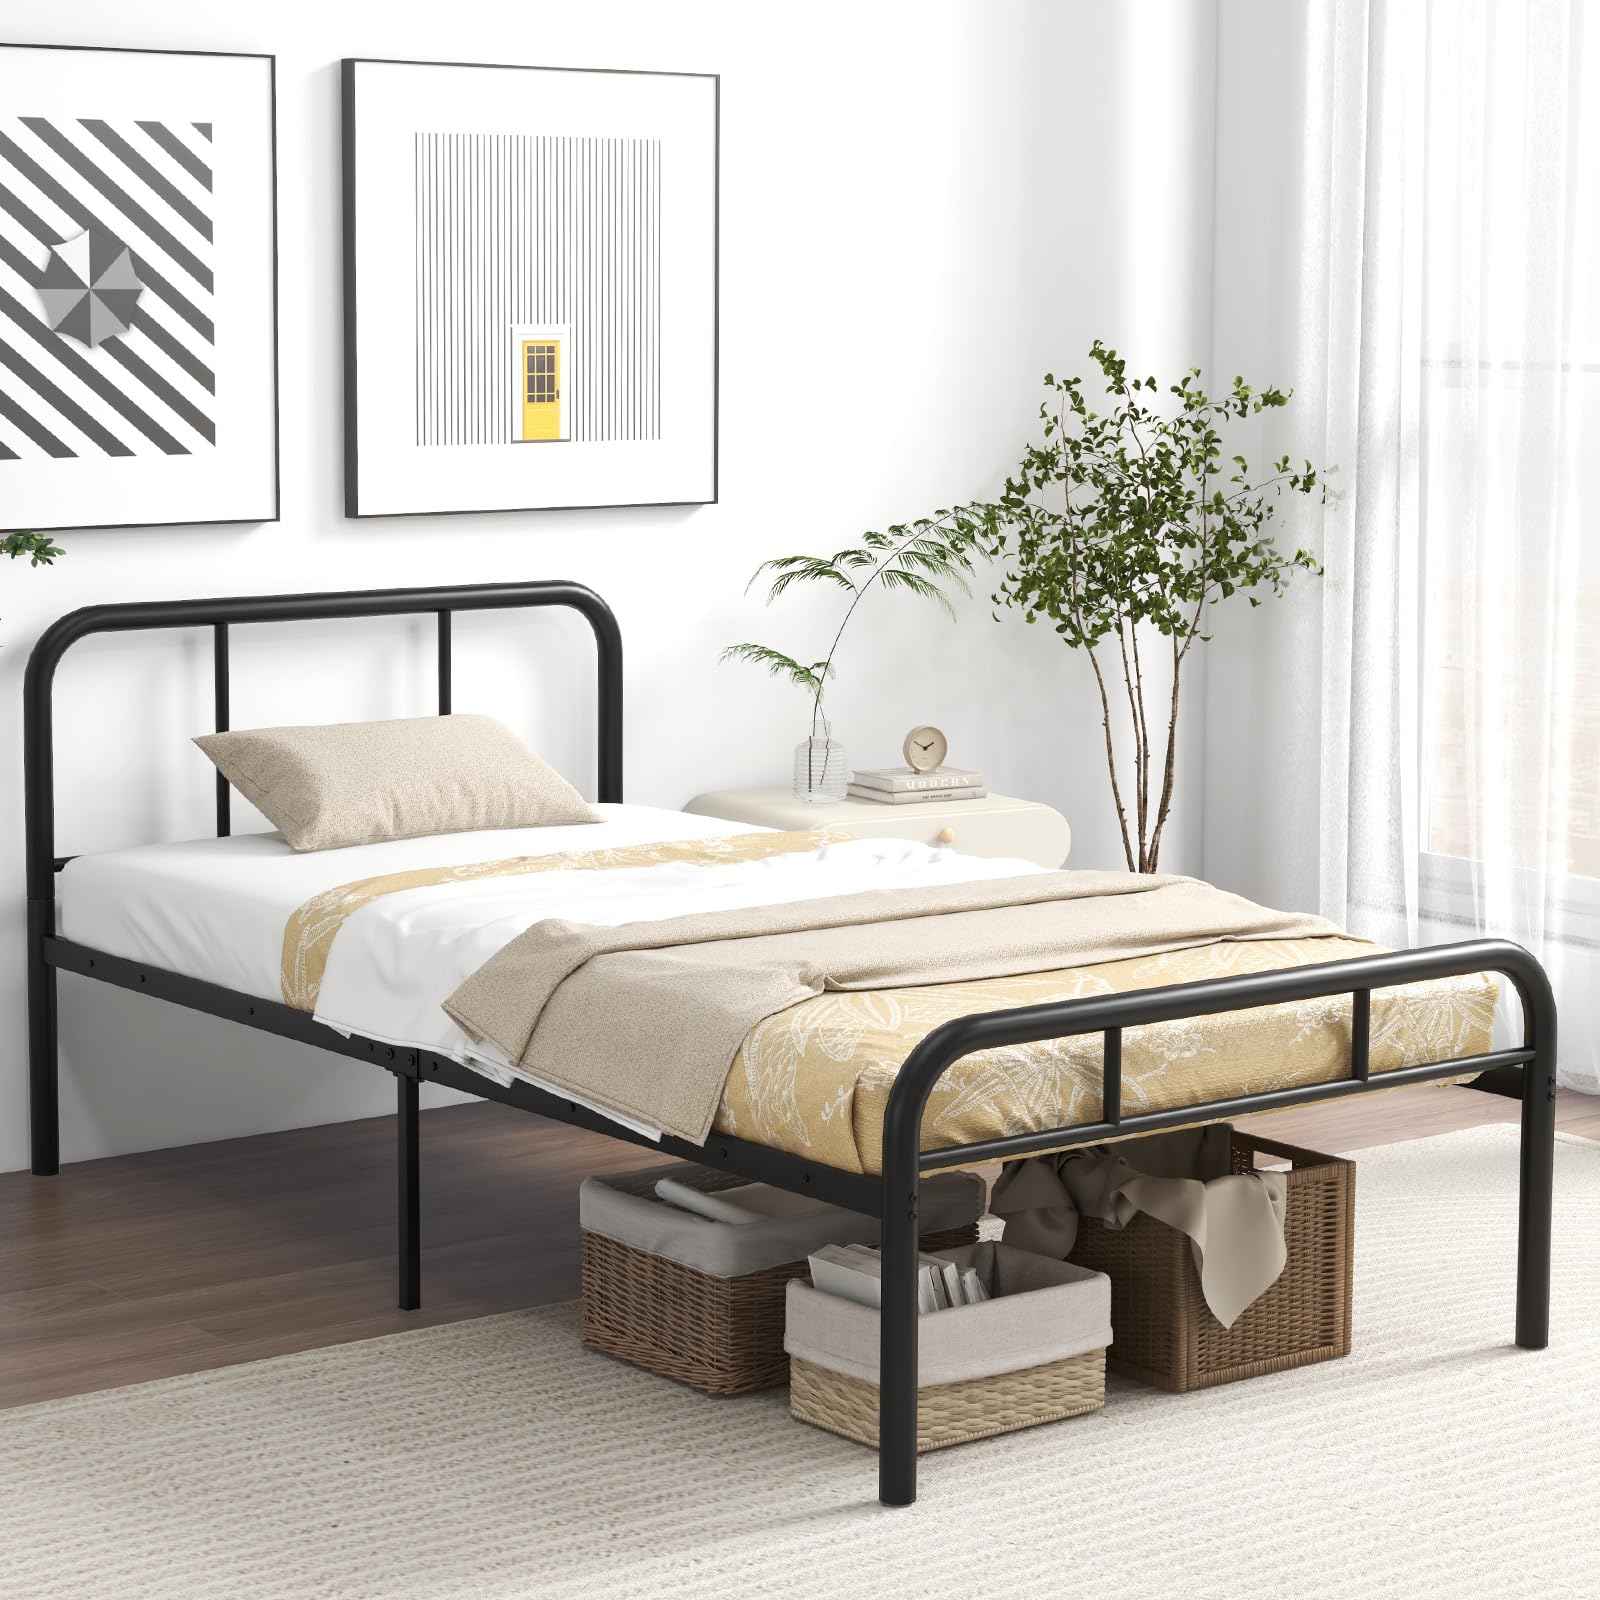 Giantex Twin Size Bed Frame, Modern Metal Platform Bed with Headboard and Footboard, Heavy Duty Steel Slat Support Mattress Foundation